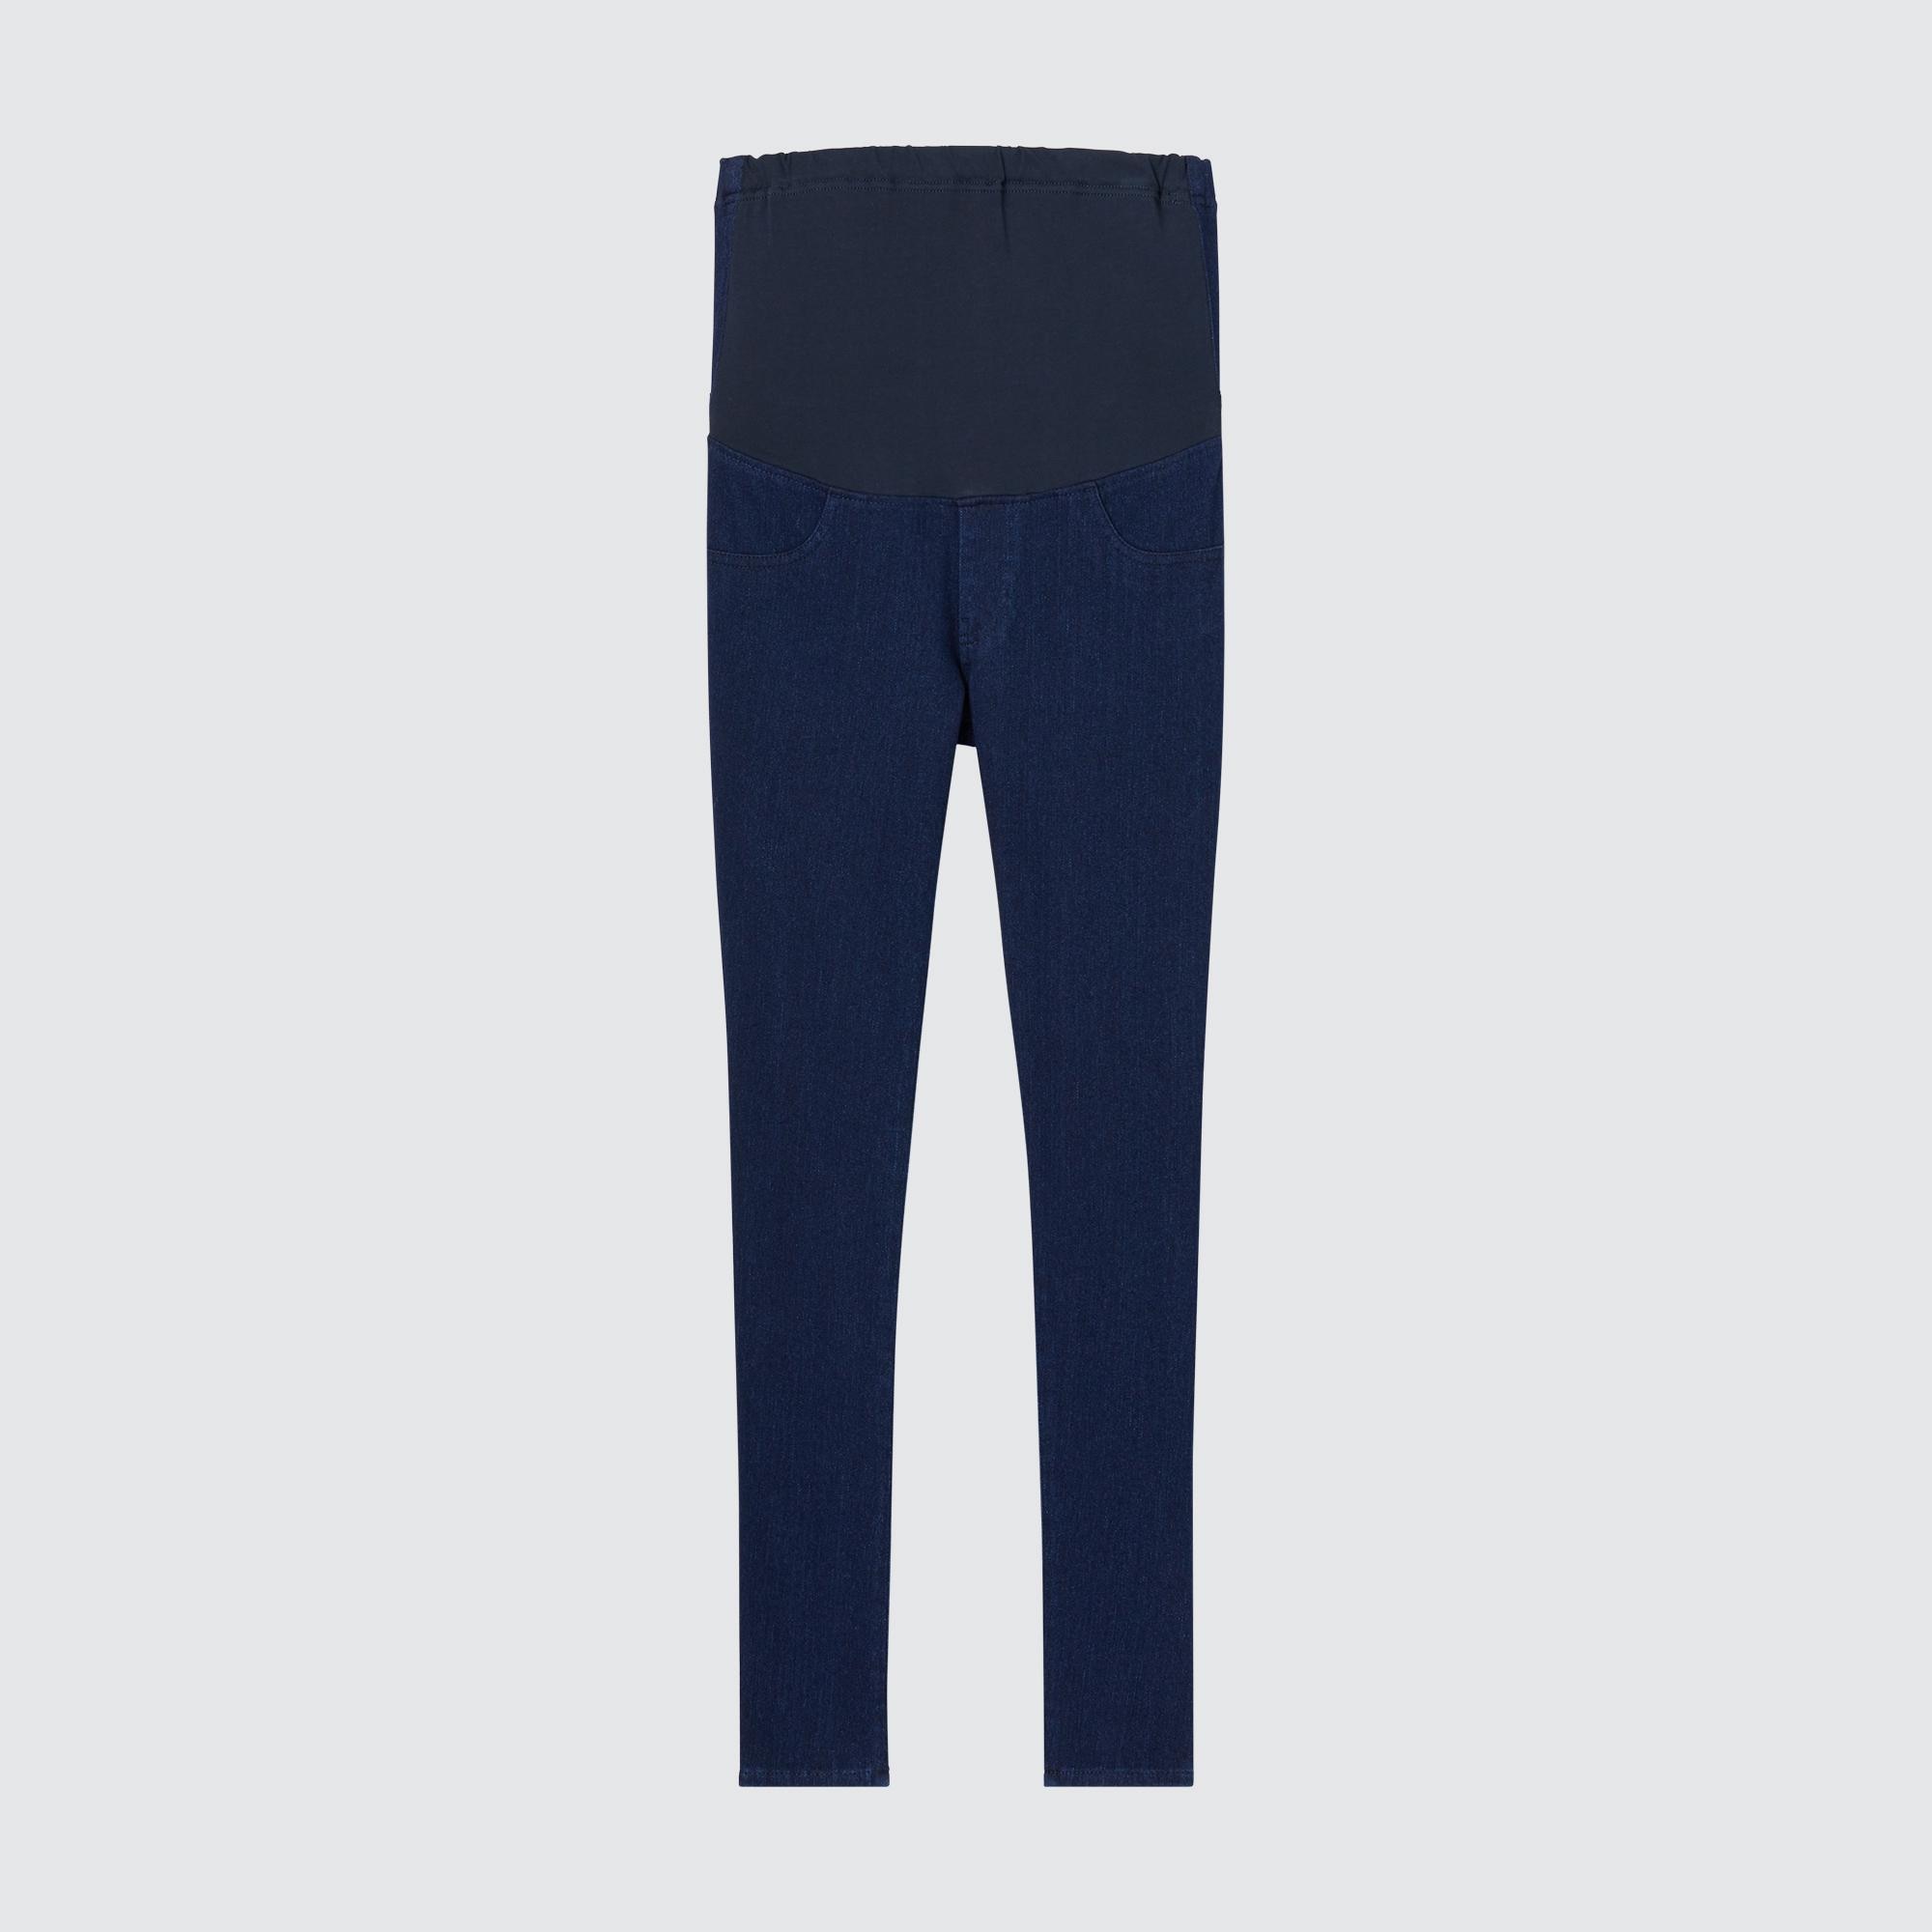 MEN LINEN BLEND RELAXED FIT TROUSERS | UNIQLO | Linen trousers men, Mens  trousers, Men linen